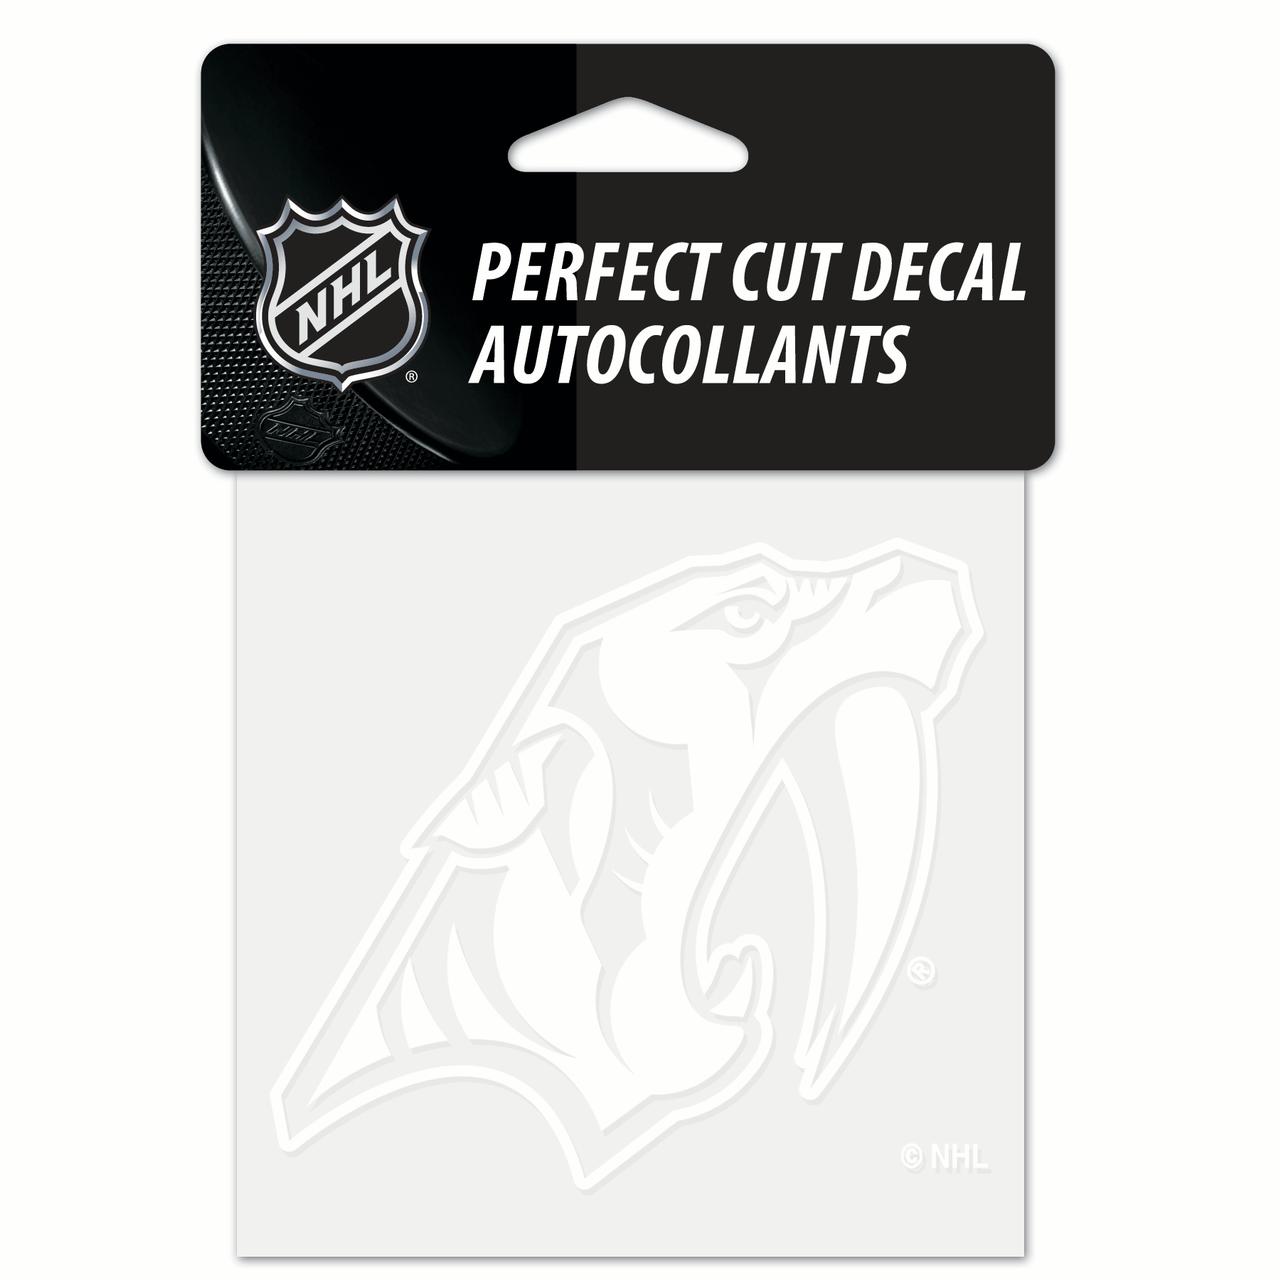 Nashville Predators Official NHL 4" x Automotive Car Decal 4x4 by Wincraft 500823 - image 1 of 2